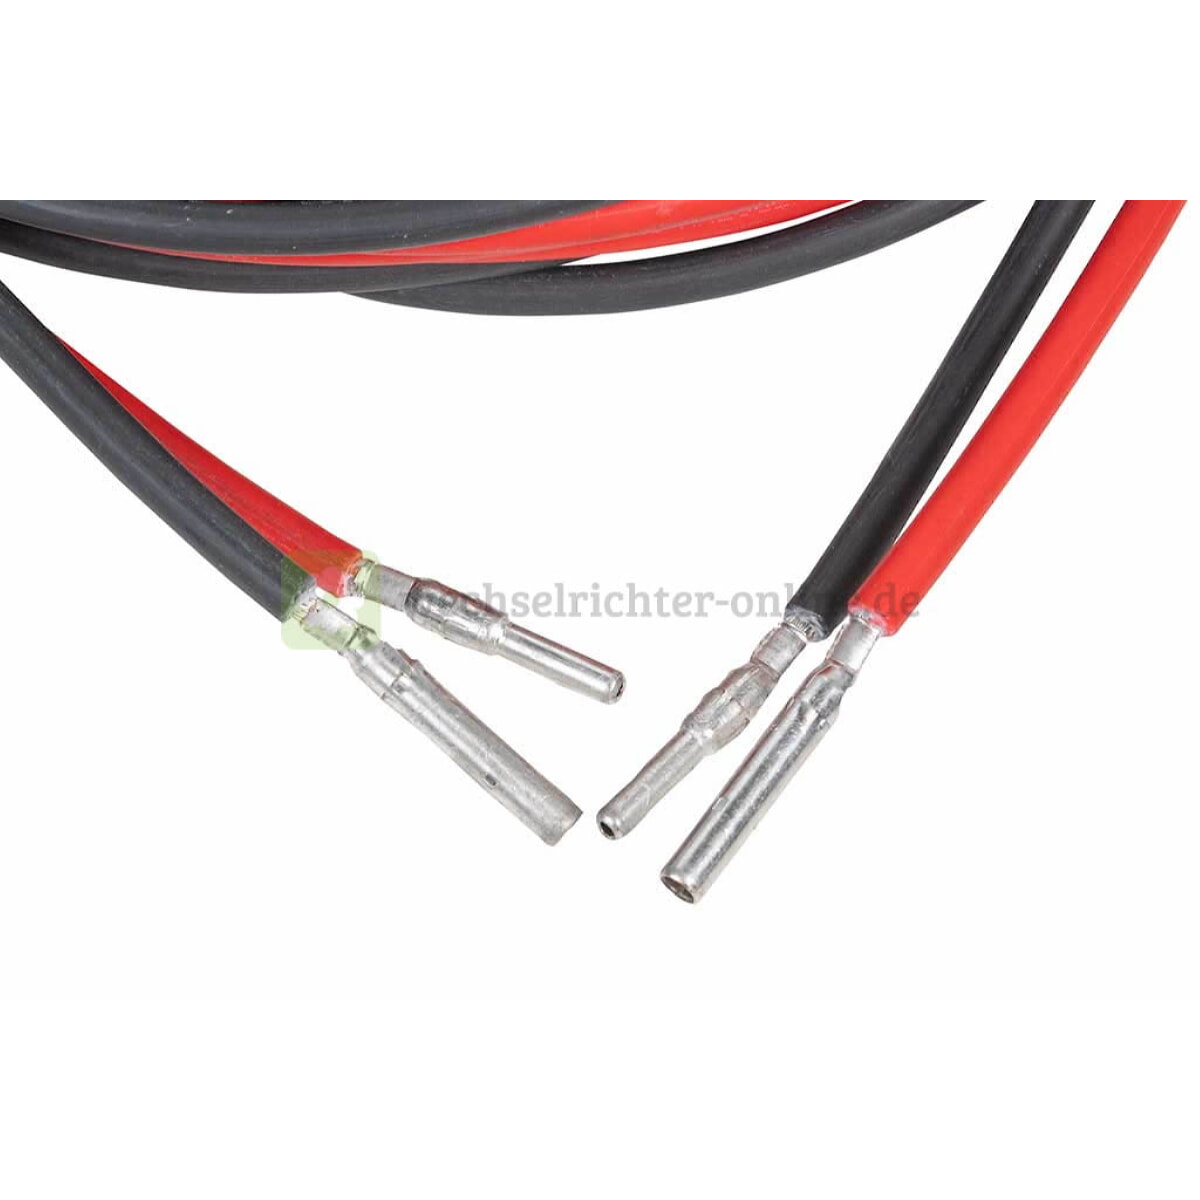 KBE solar cable pre-assembled black/red for underground installation 6mm² DB EN50618 2x 5 meters